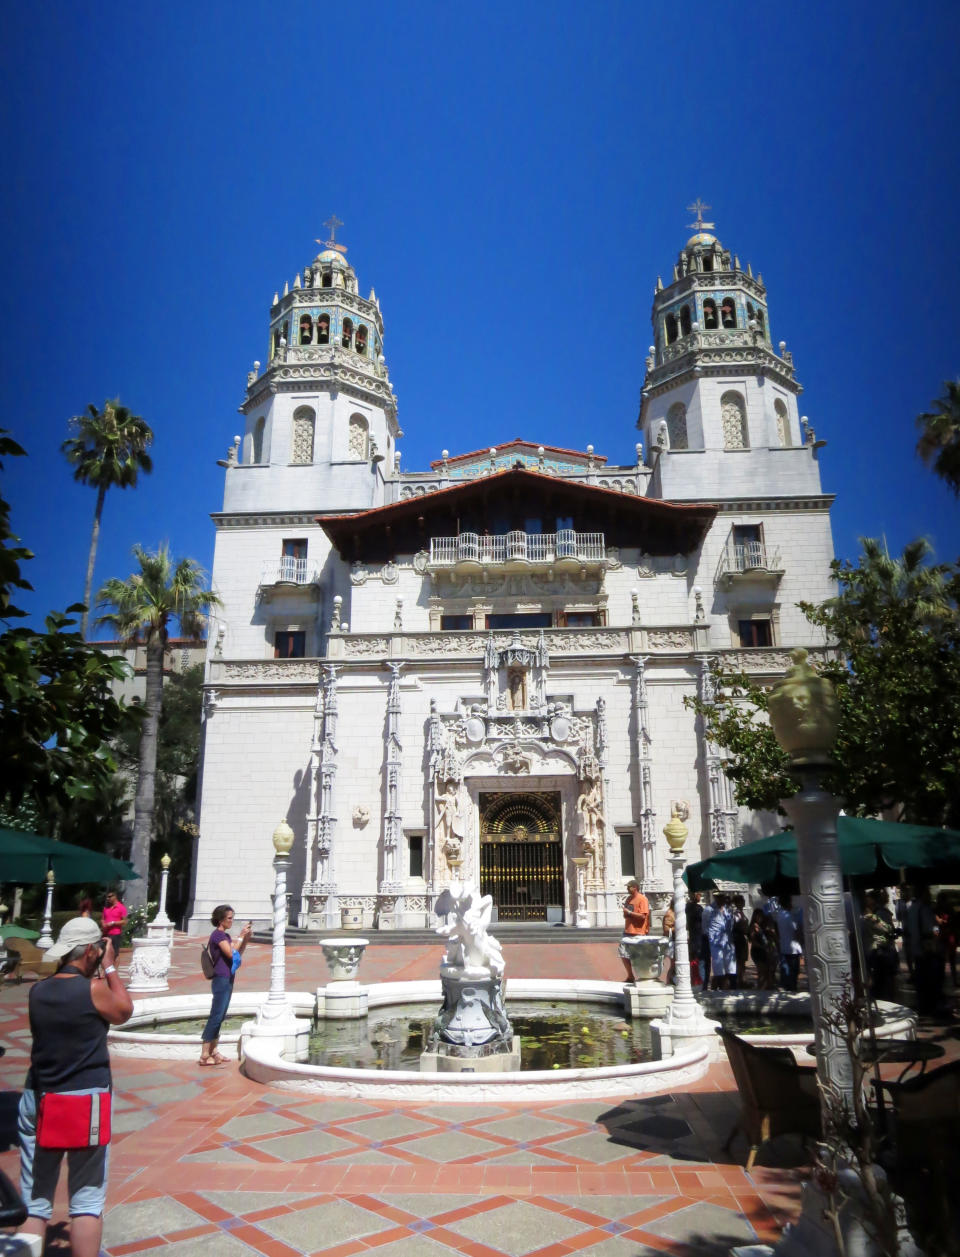 This Aug. 30, 2013 photo shows the exterior of Hearst Castle, the 165-room estate of newspaper publisher William Randolph Hearst, in San Simeon, Calif. Visitors can tour the estate which he called "La Cuesta Encantada" ("The Enchanted Hill"), that overlooks the Pacific Ocean. (AP Photo/Jim MacMillan)